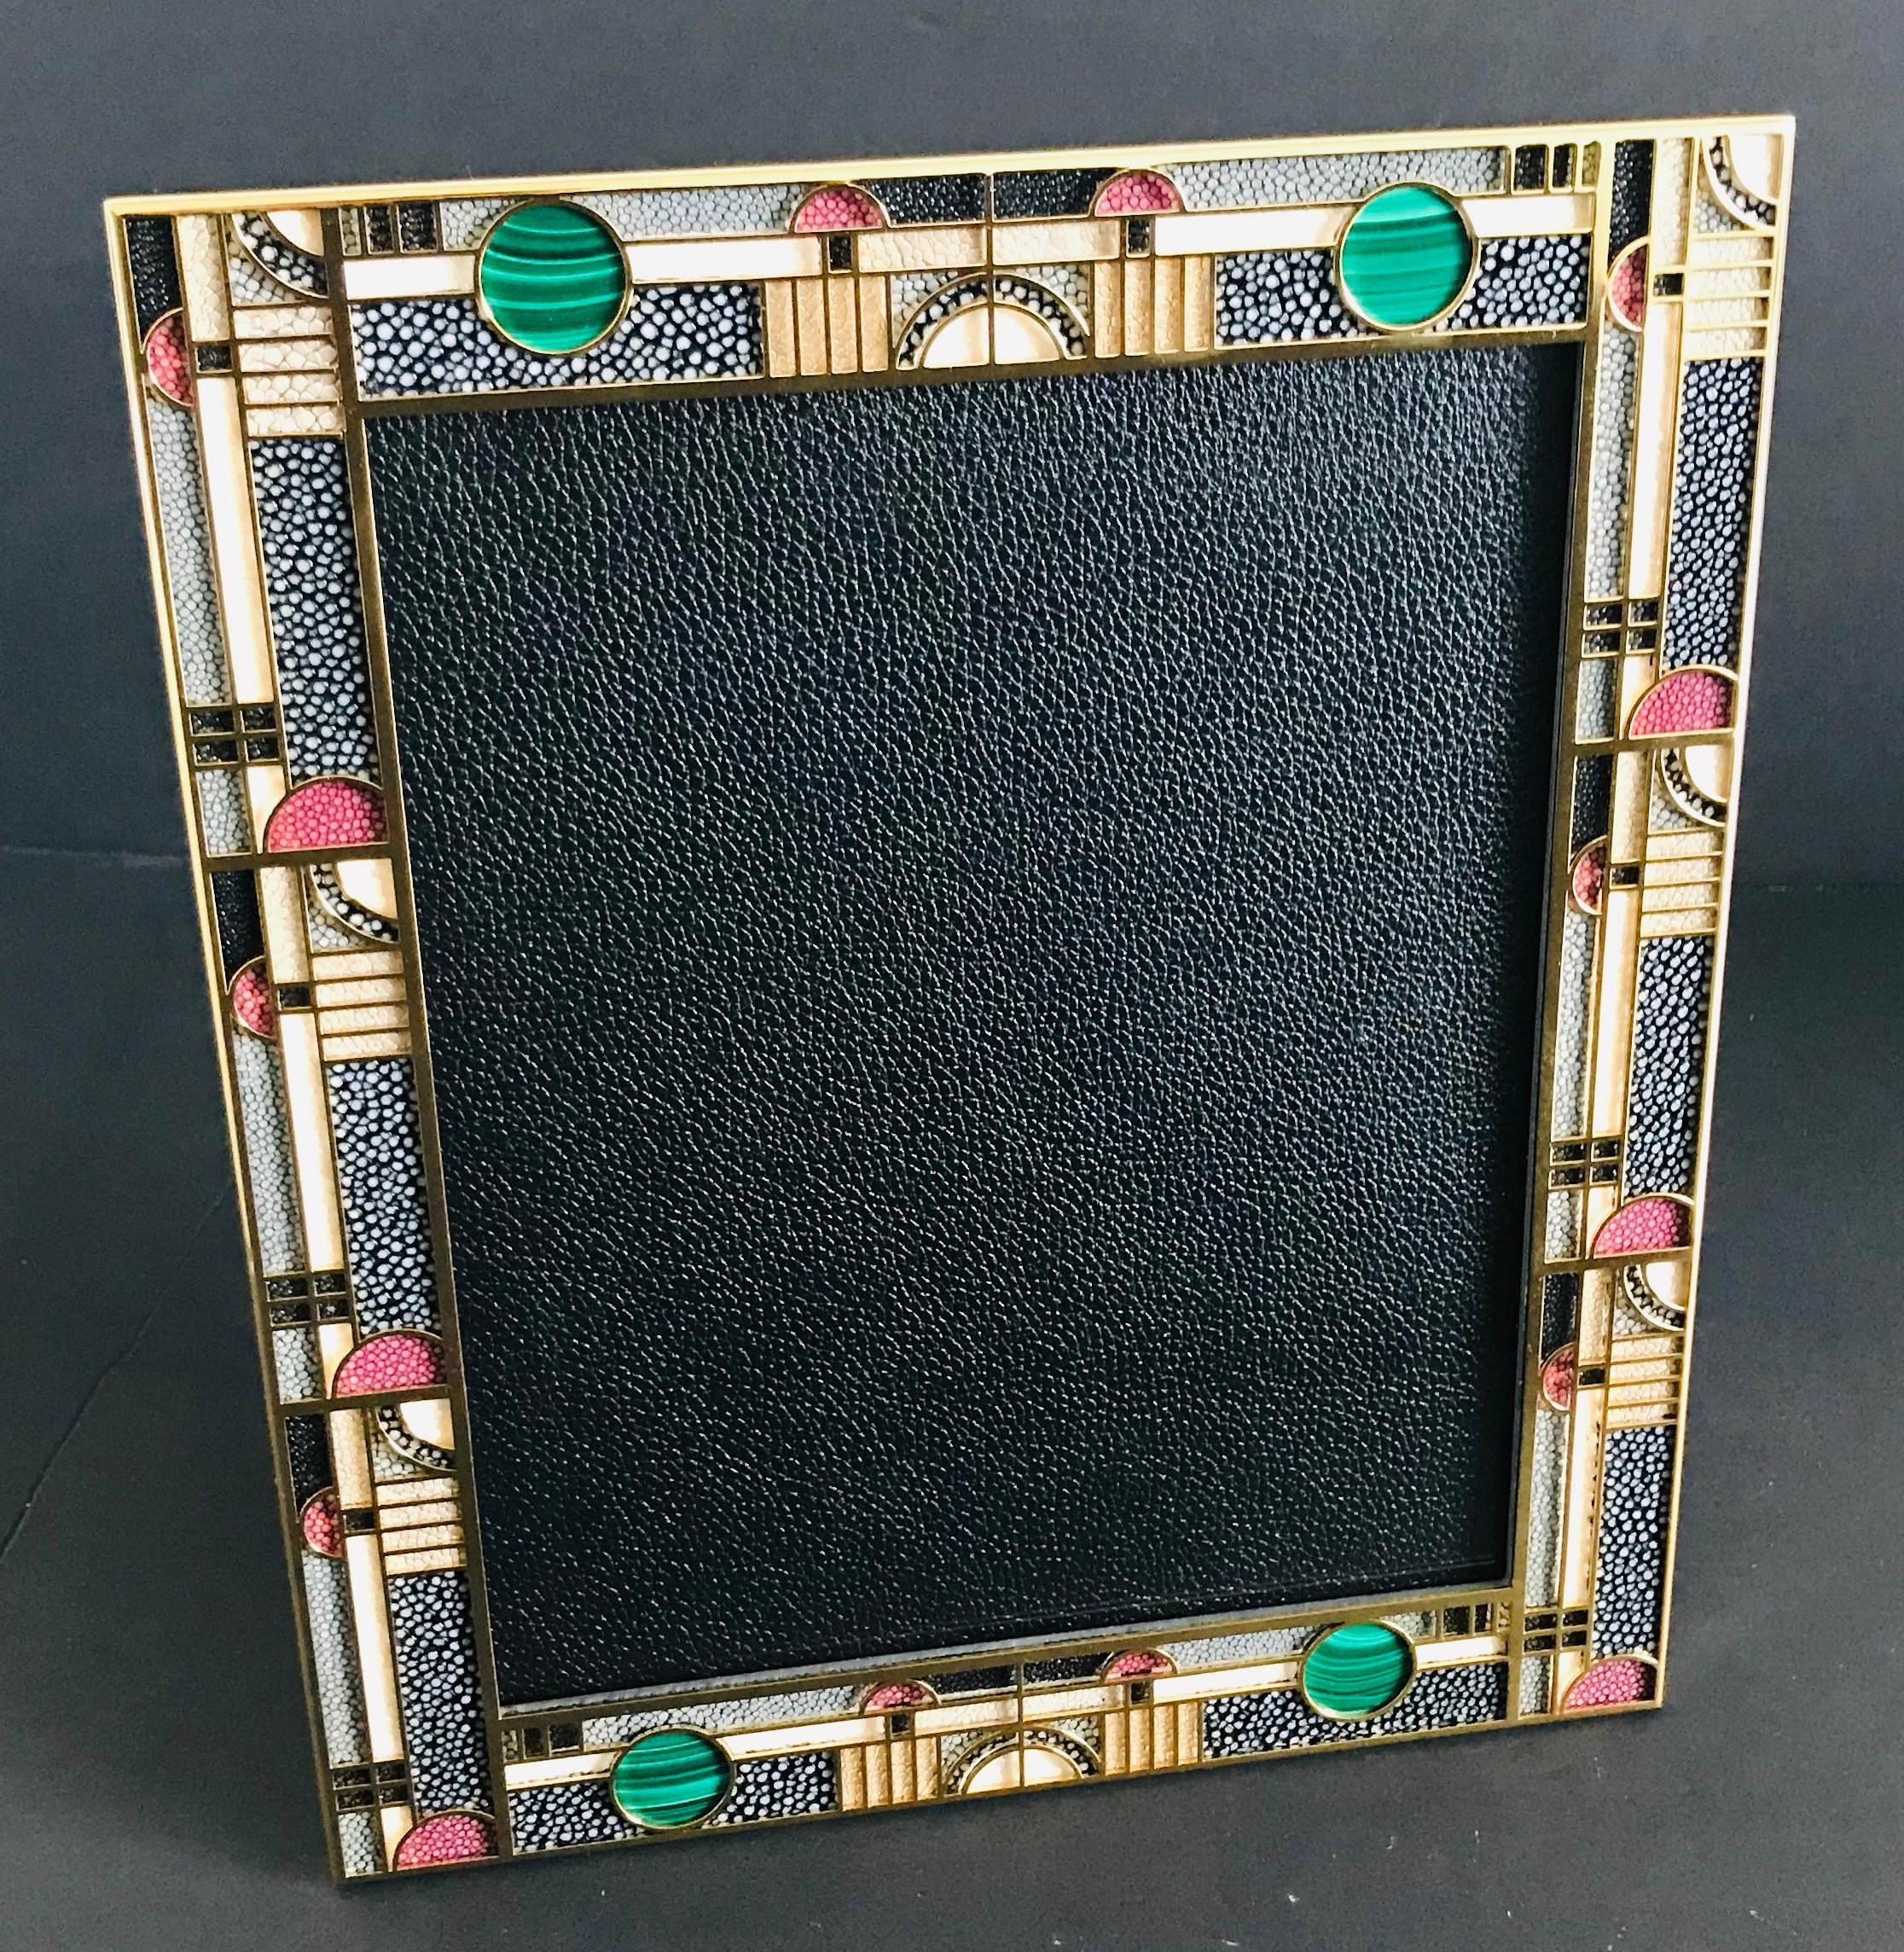 Multi-color shagreen with malachite inserts and gold-plated picture frame by Fabio Ltd
Height: 12 inches / Width: 10.25 inches / Depth: 1 inch
Photo size: 8 inches by 10 inches
1 in stock in Palm Springs
Order Reference #: FABIOLTD PF45
This piece